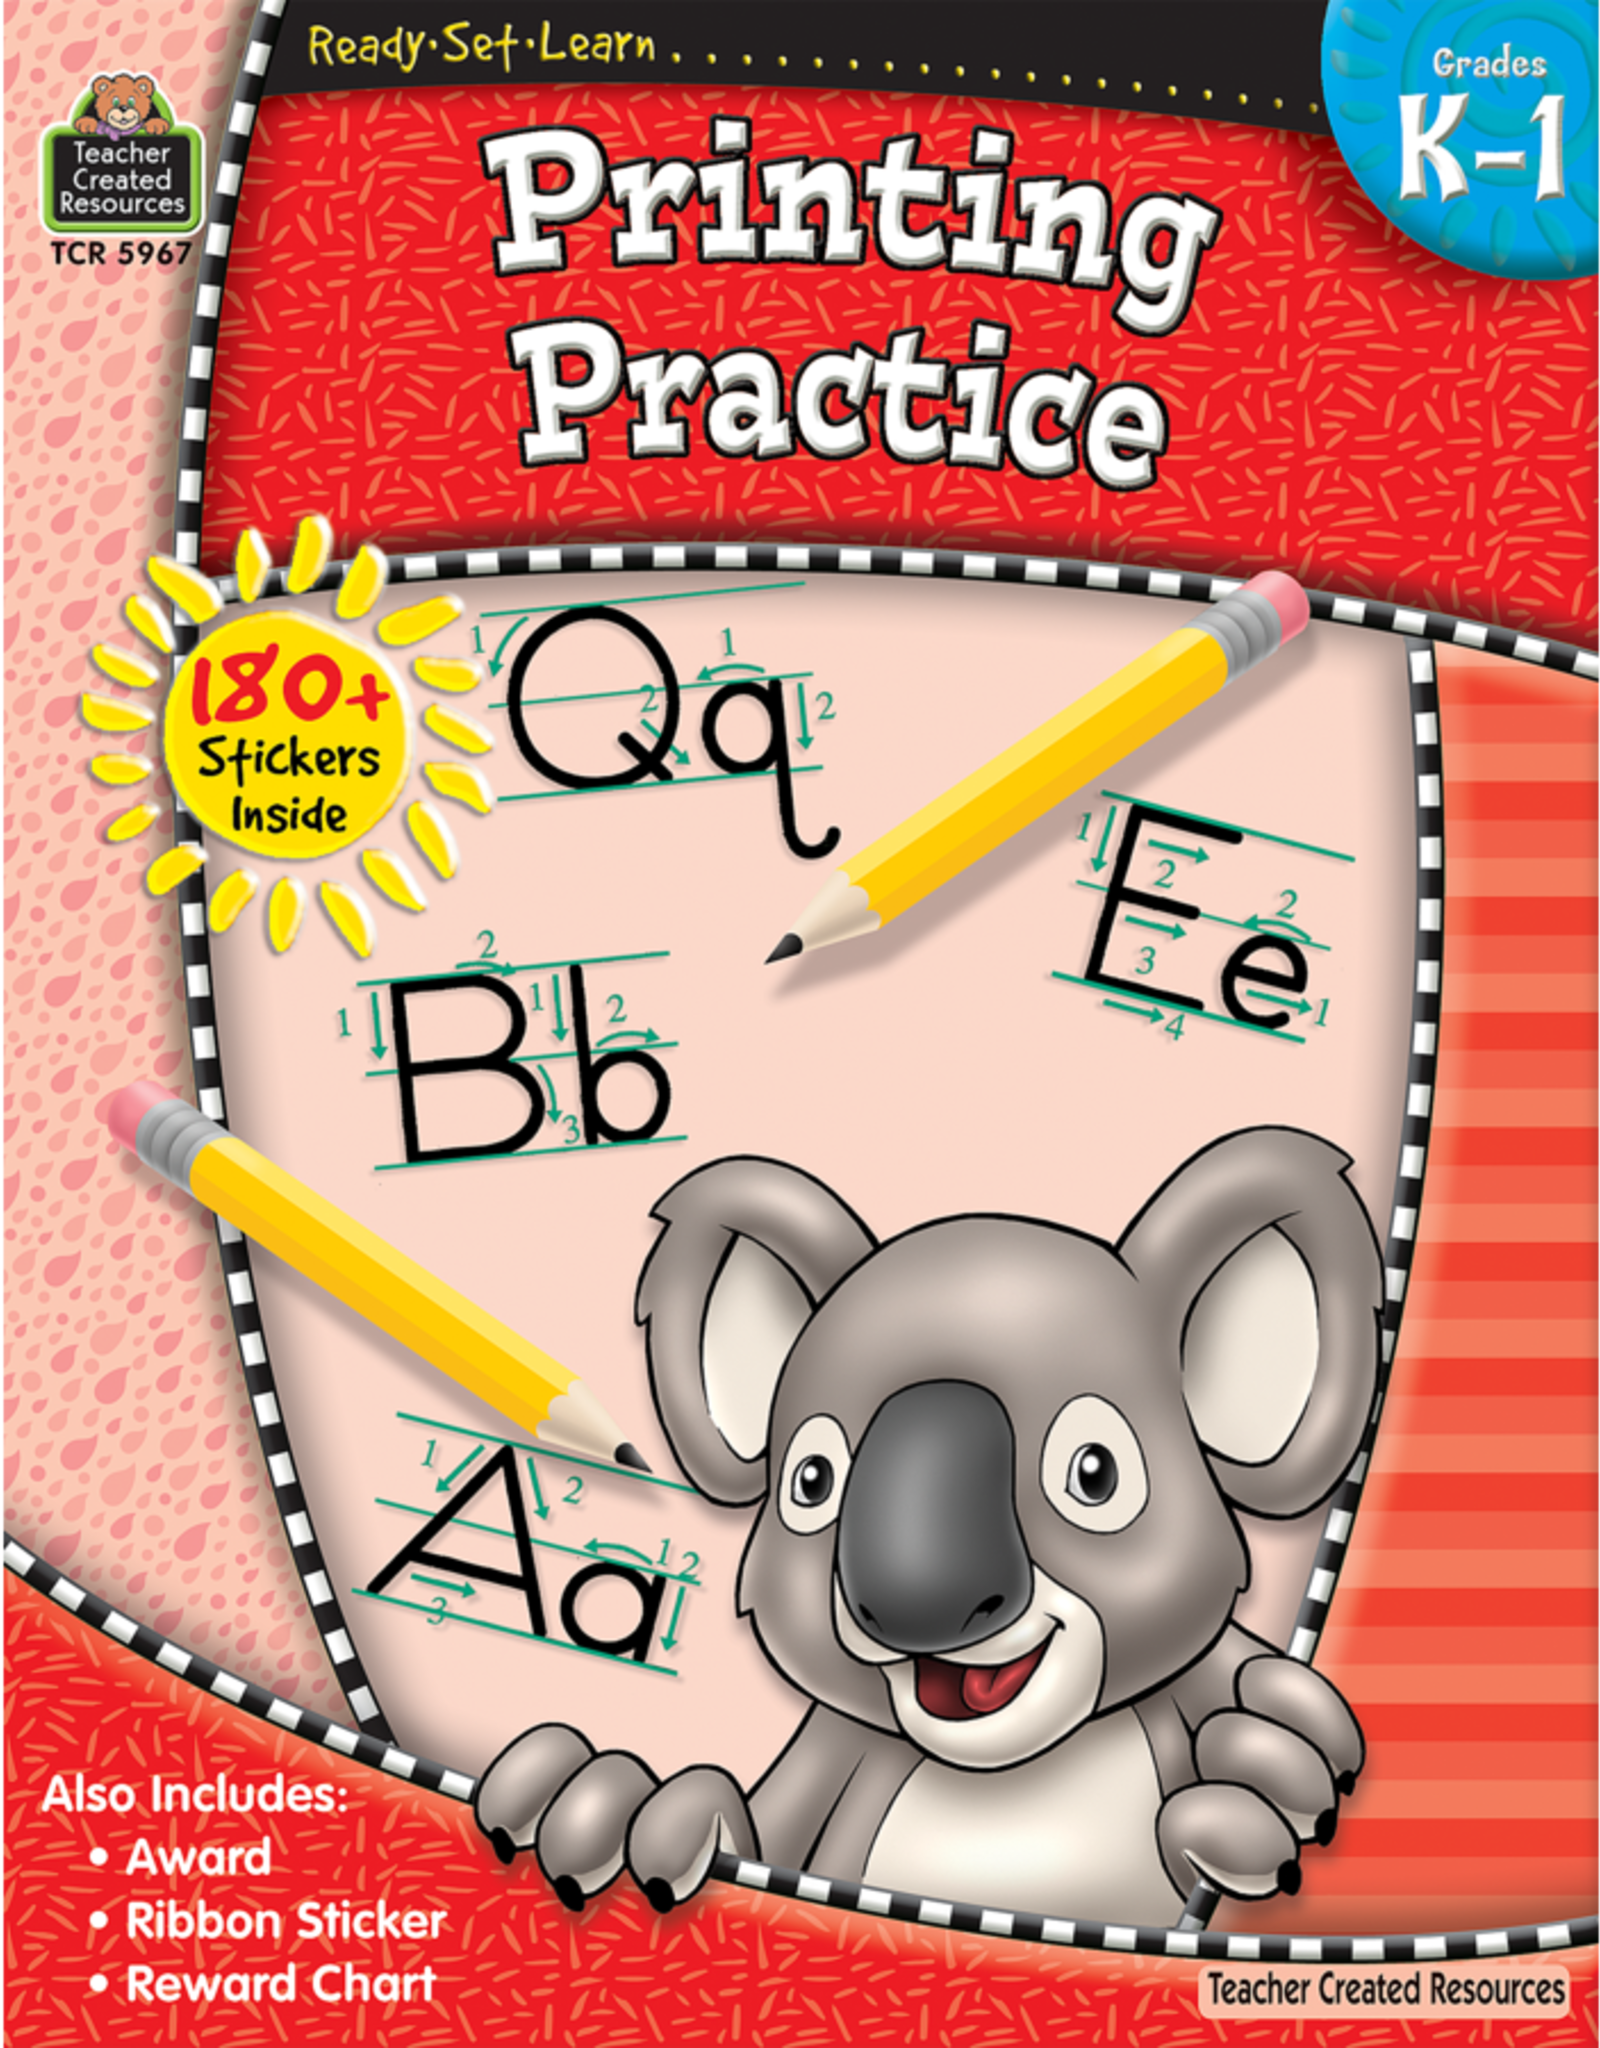 Teacher Created Resources Ready-Set-Learn: Printing Practice Grade K-1